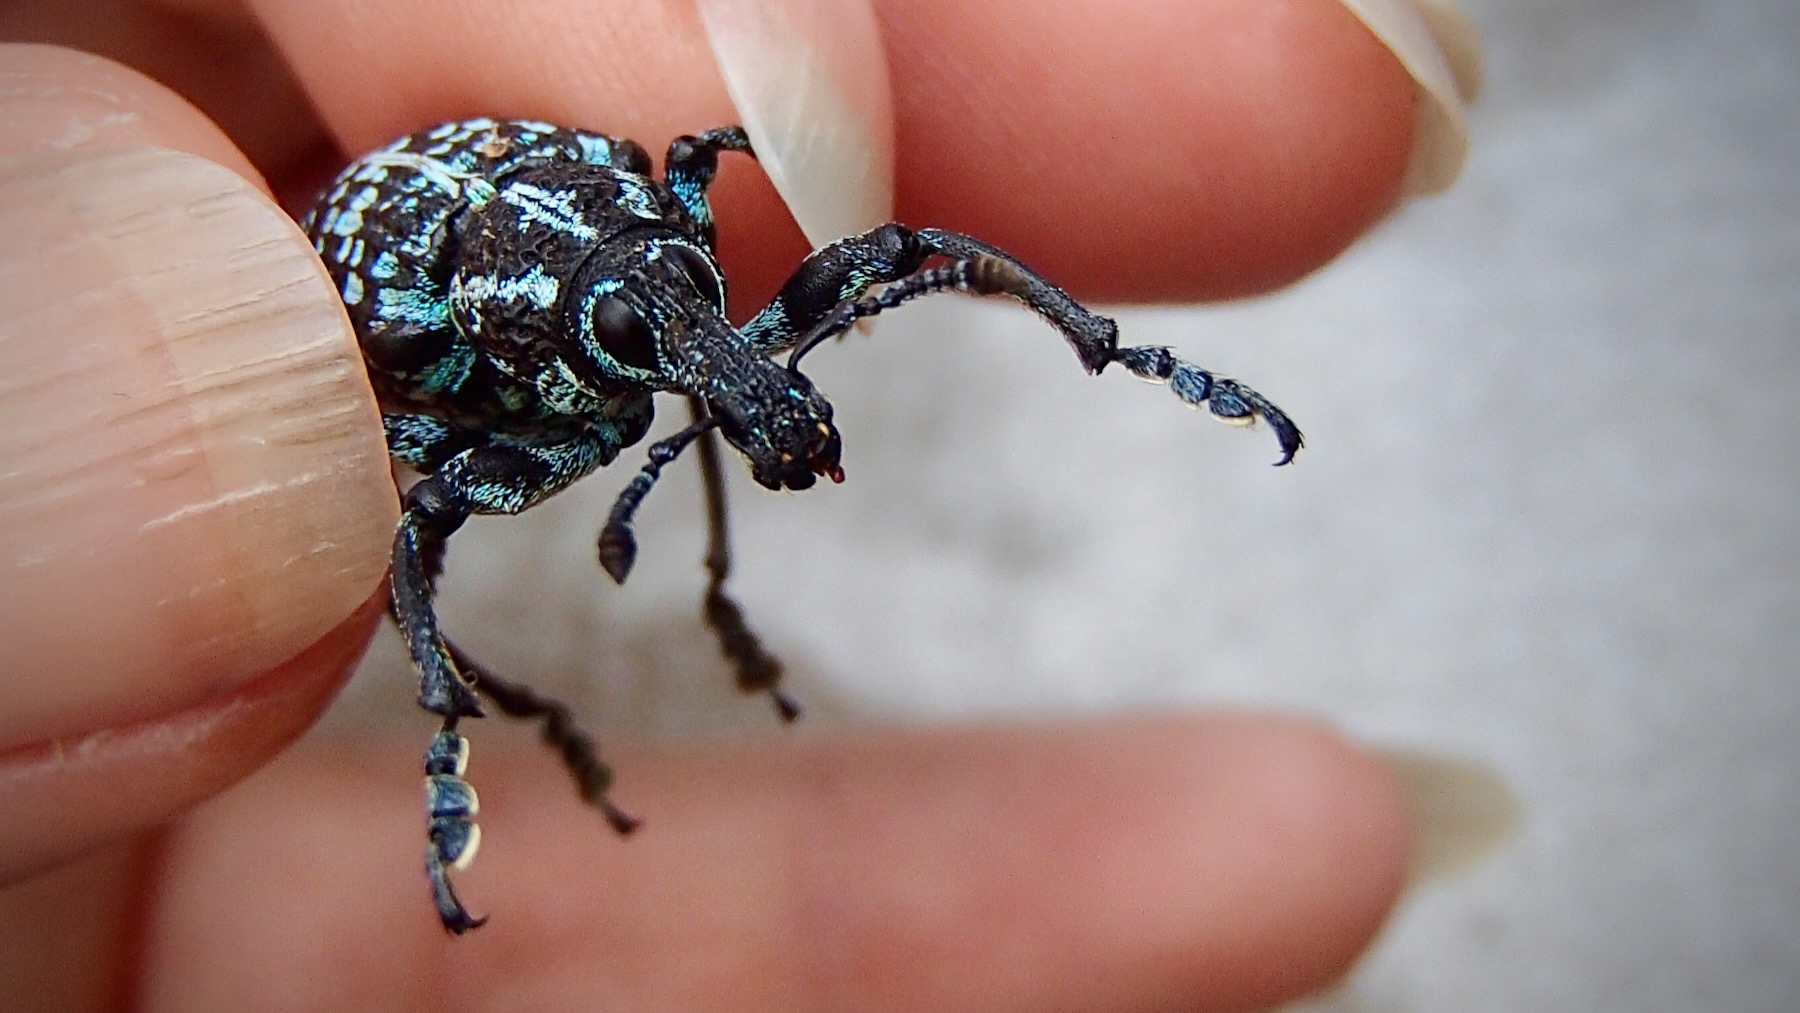 A Botany Bay diamond weevil (Chrysolopus spectabilis), aka a sapphire weevil, photographed at Bunjaree Cottages on 23 May 2021.